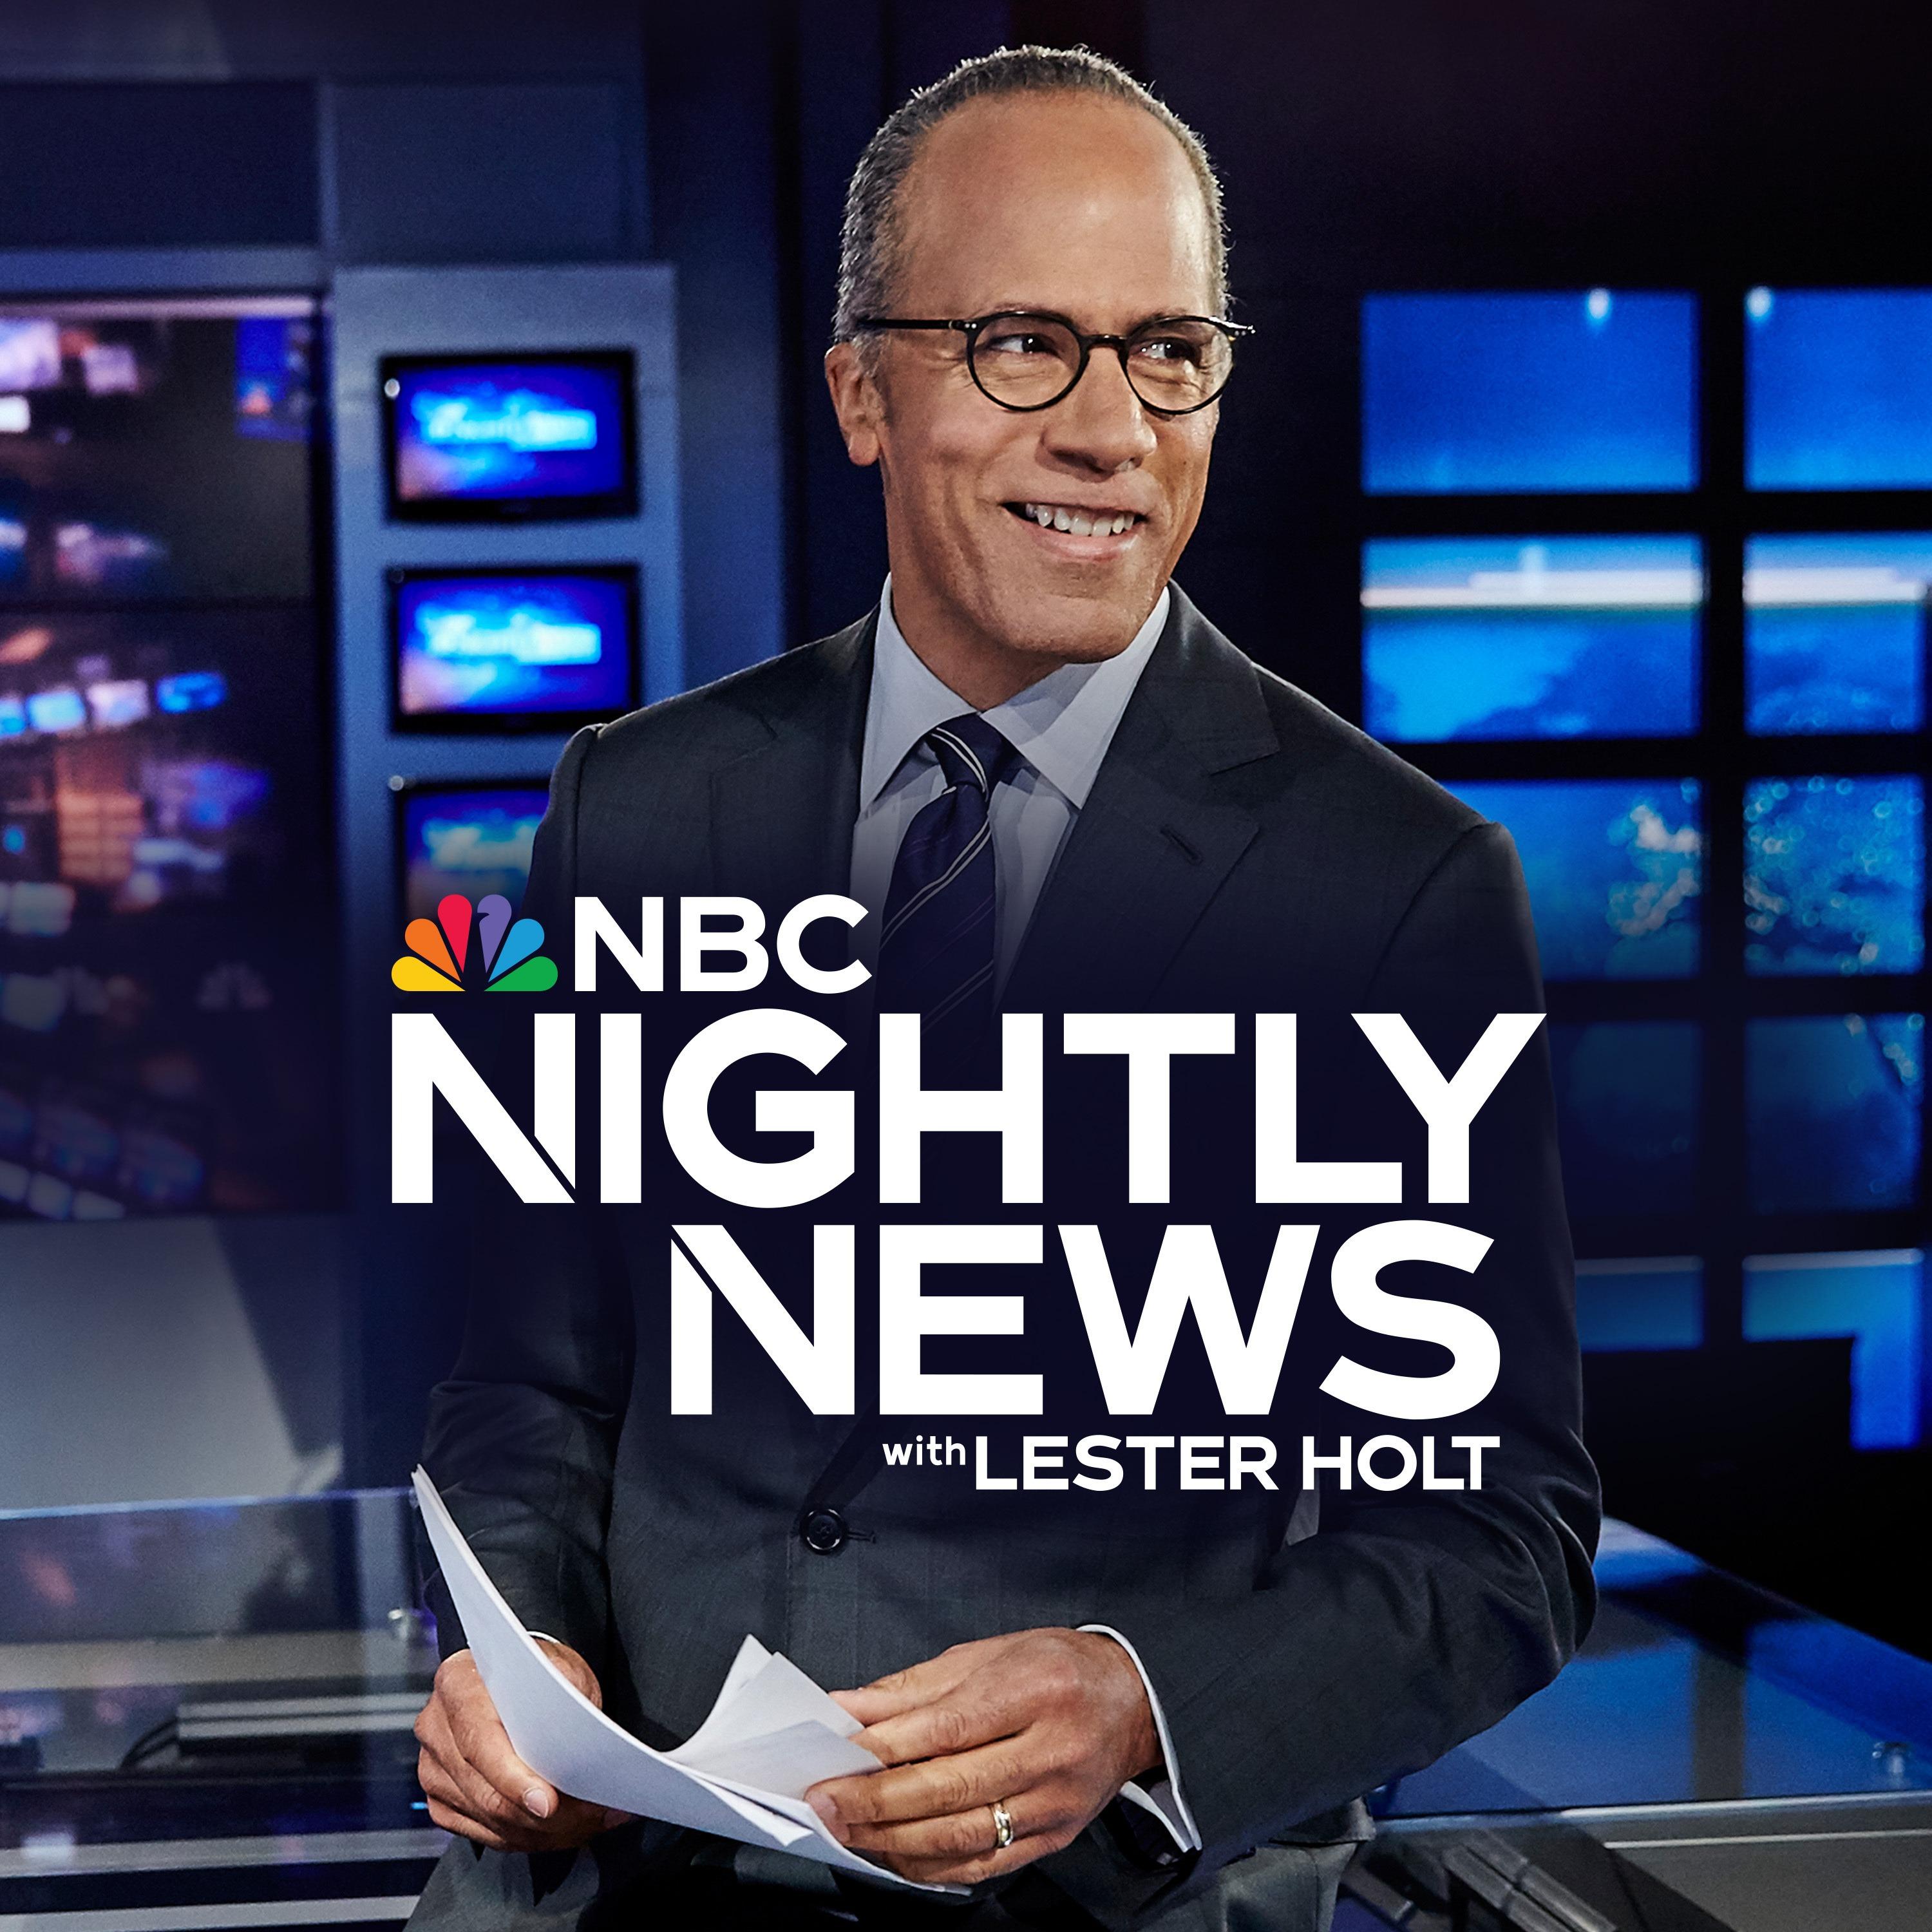 Show poster of NBC Nightly News with Lester Holt